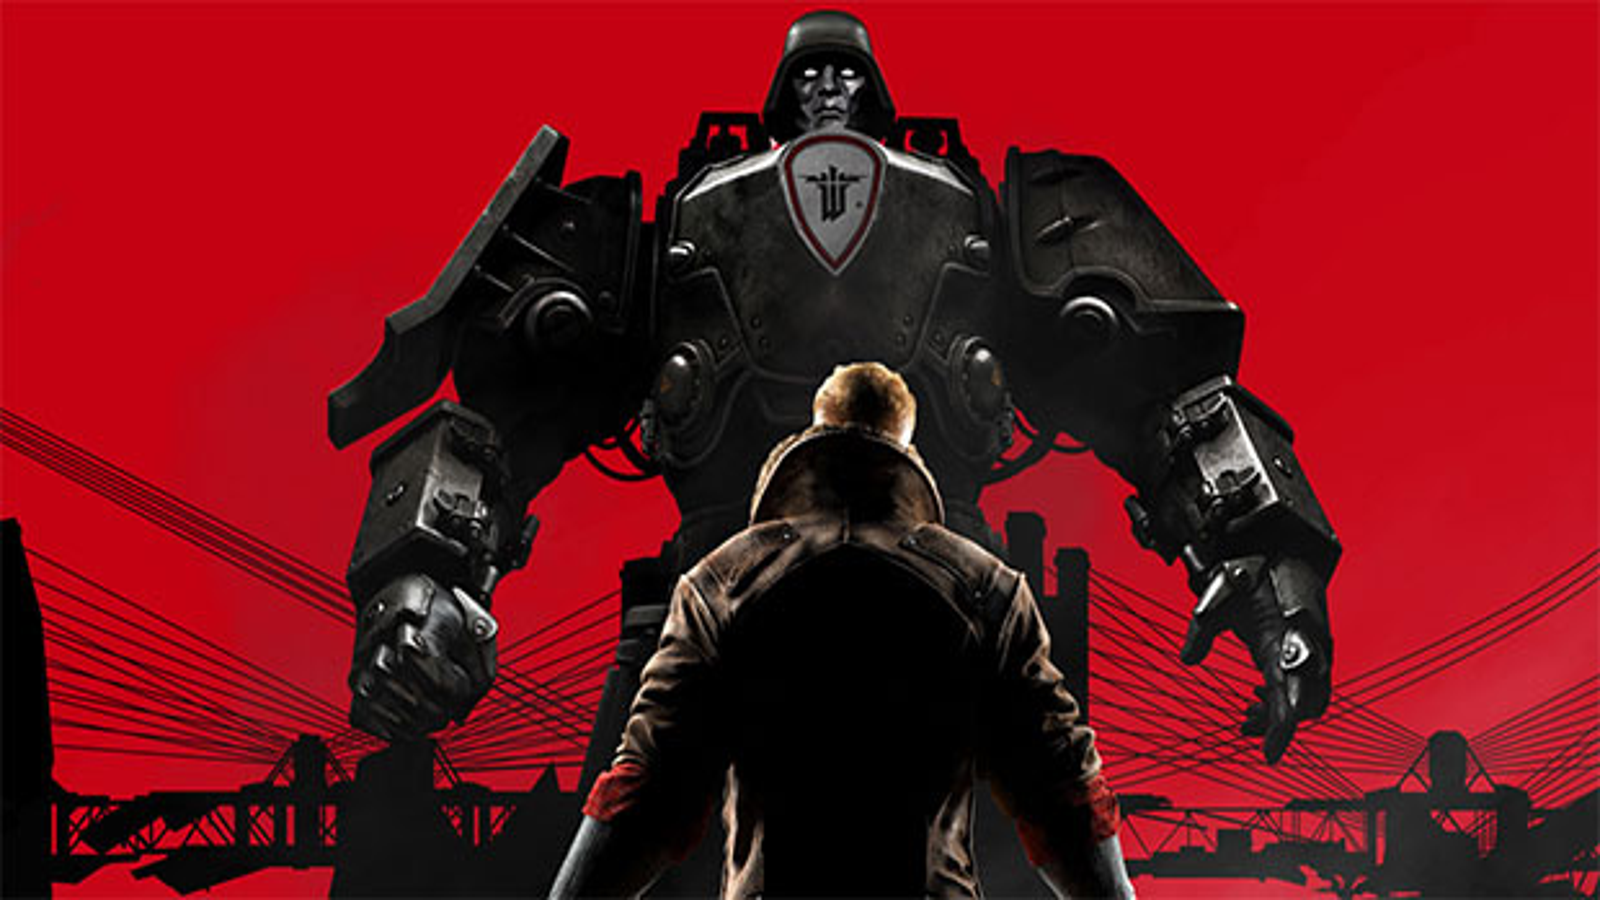 Hungry like the wolf: Wolfenstein New Order Technobubble review